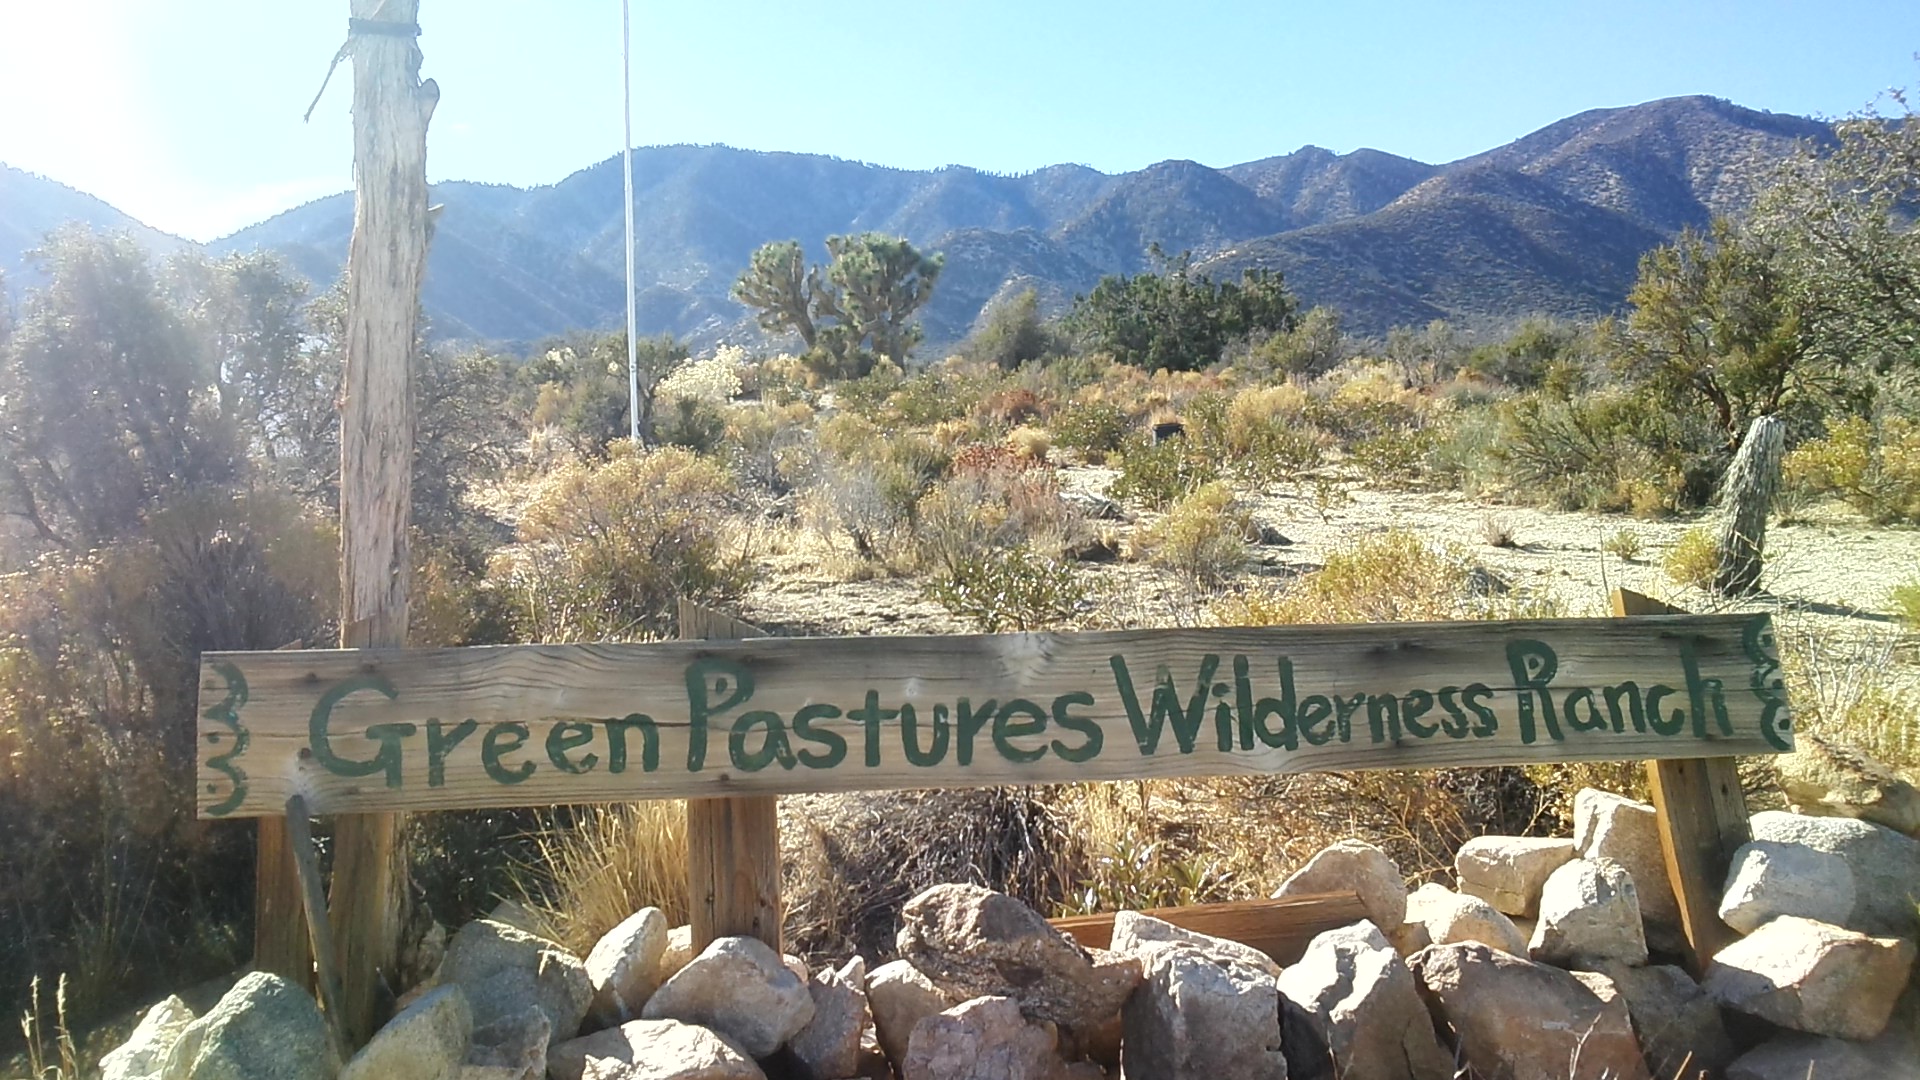 Green Pastures Wilderness Ranch / Campus for homeschooling students